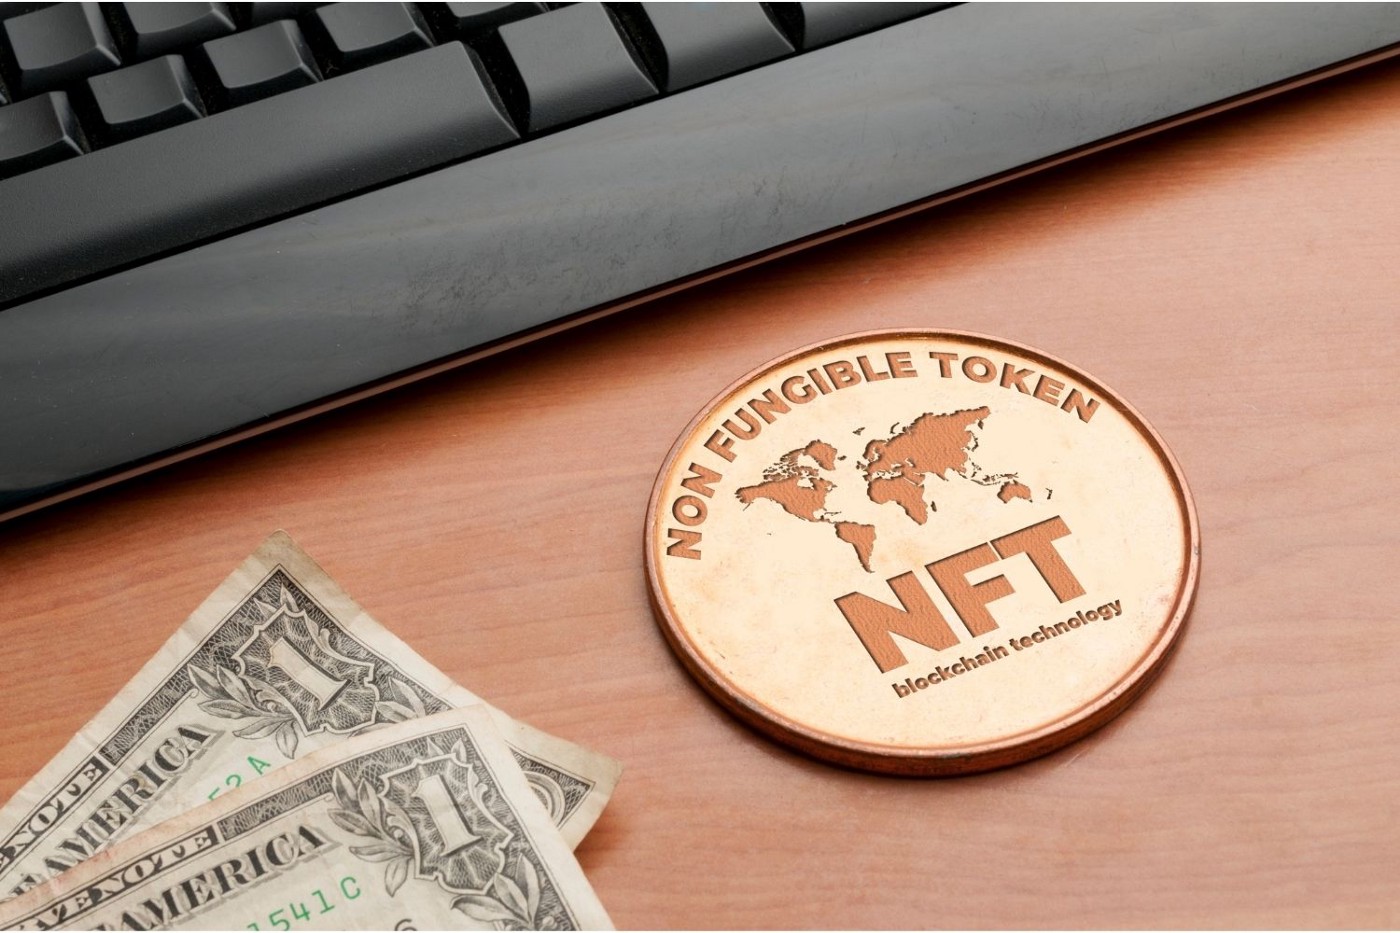 Physical representation of an NFT token laying on a desk near a computer keyboard and two one-dollar bills.